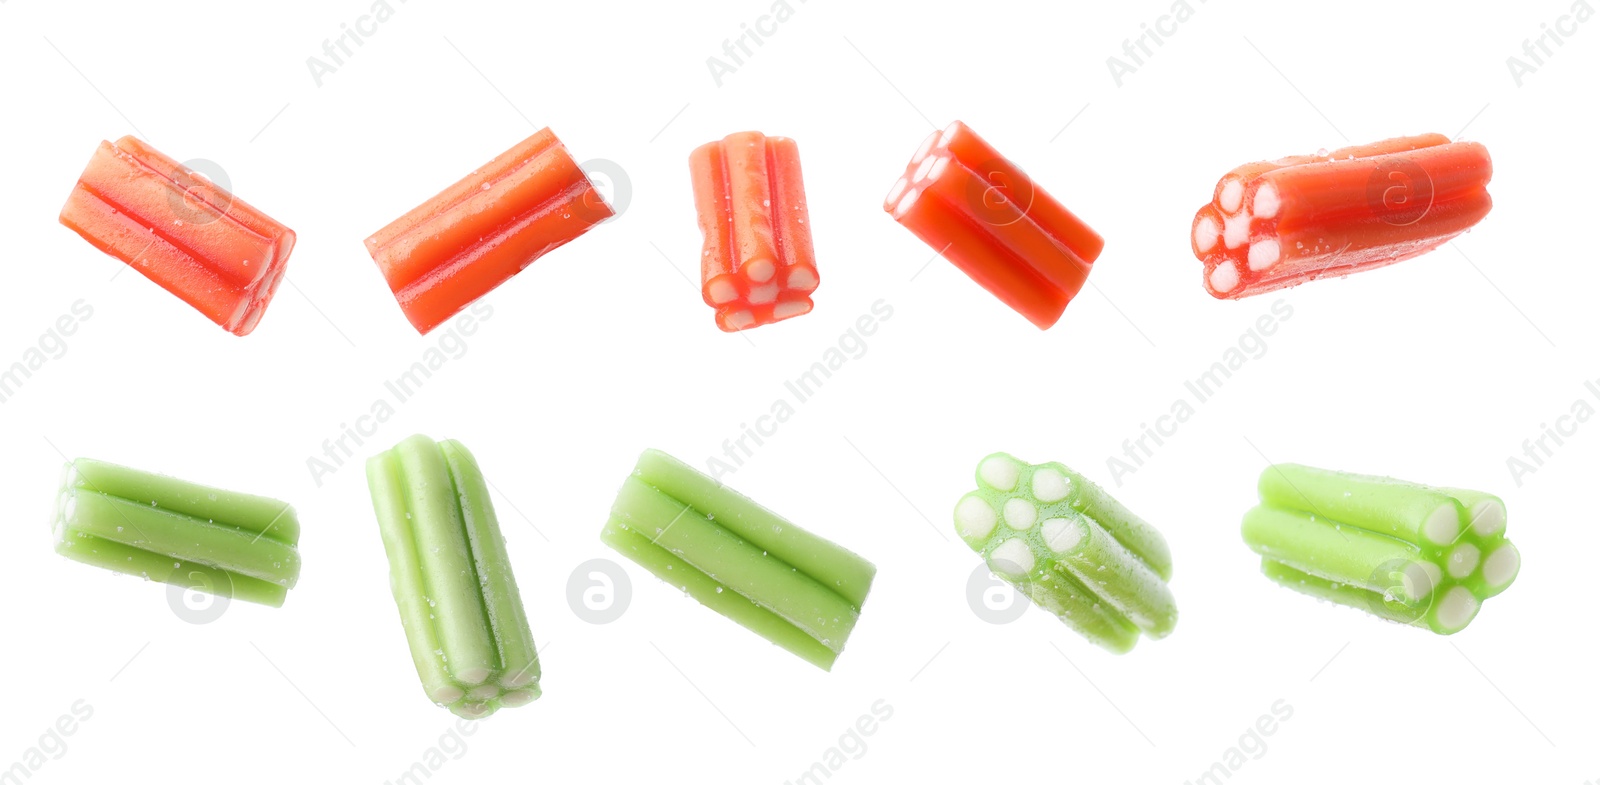 Image of Collage of tasty jelly candies on white background, different sides